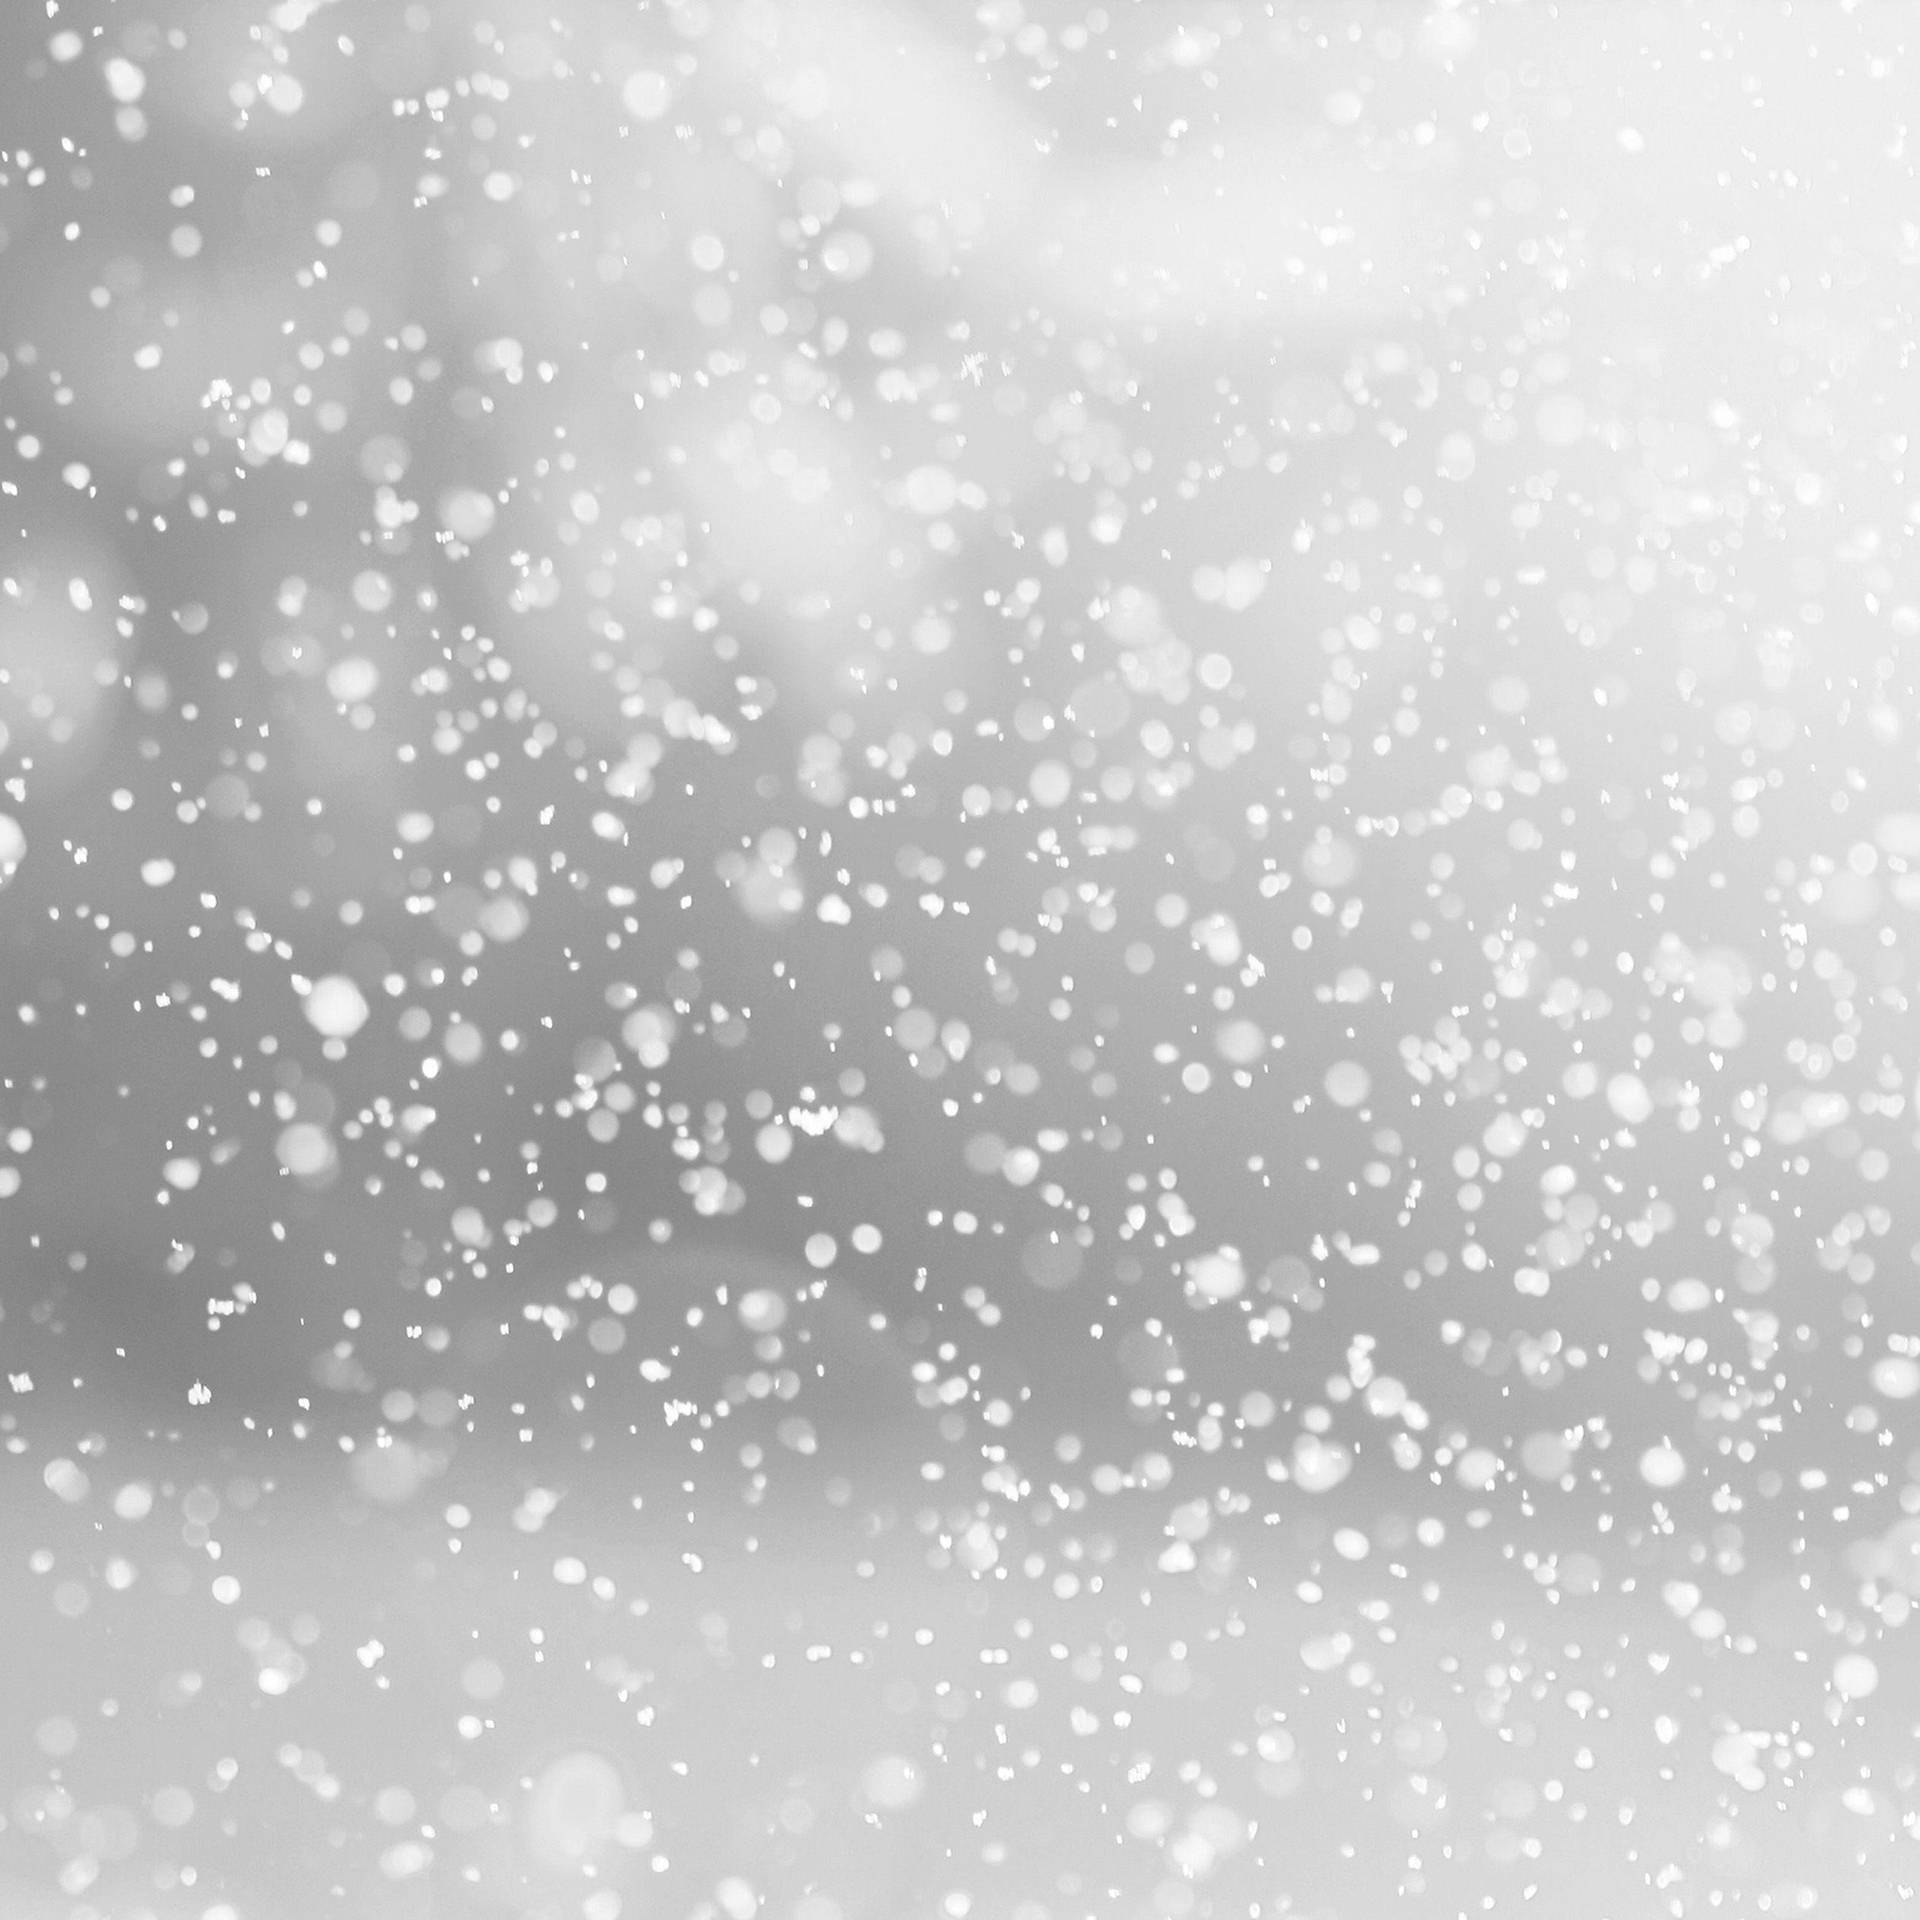 2524X2524 Snow Wallpaper and Background